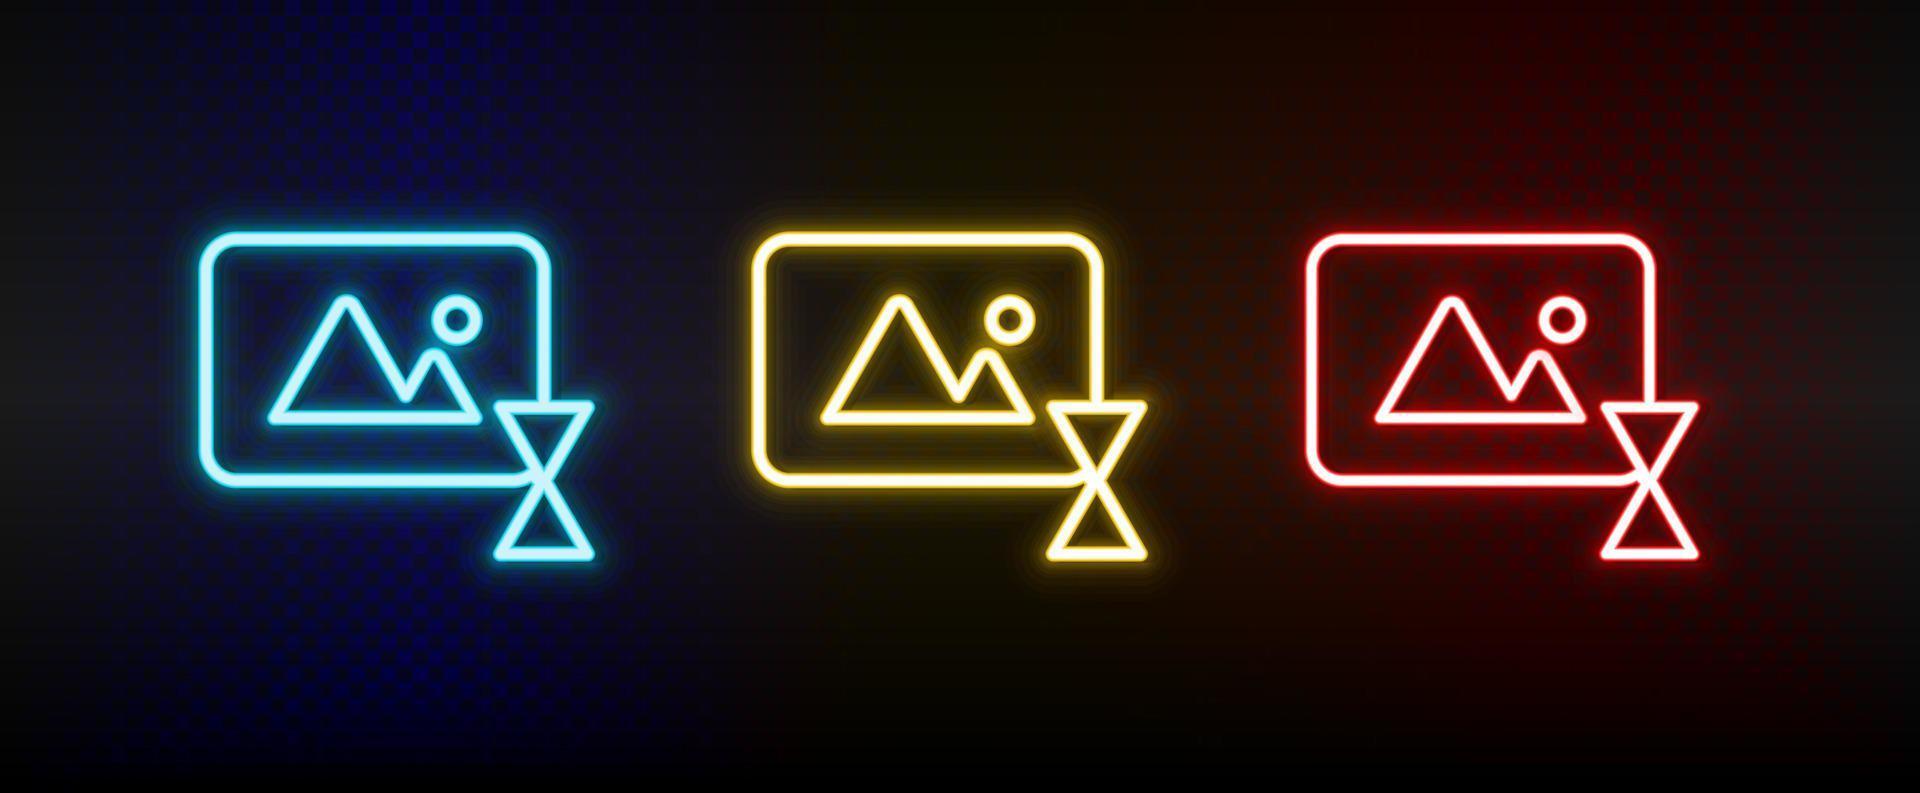 delay, photo, time neon icon set. Set of red, blue, yellow neon vector icon on dark transparent background